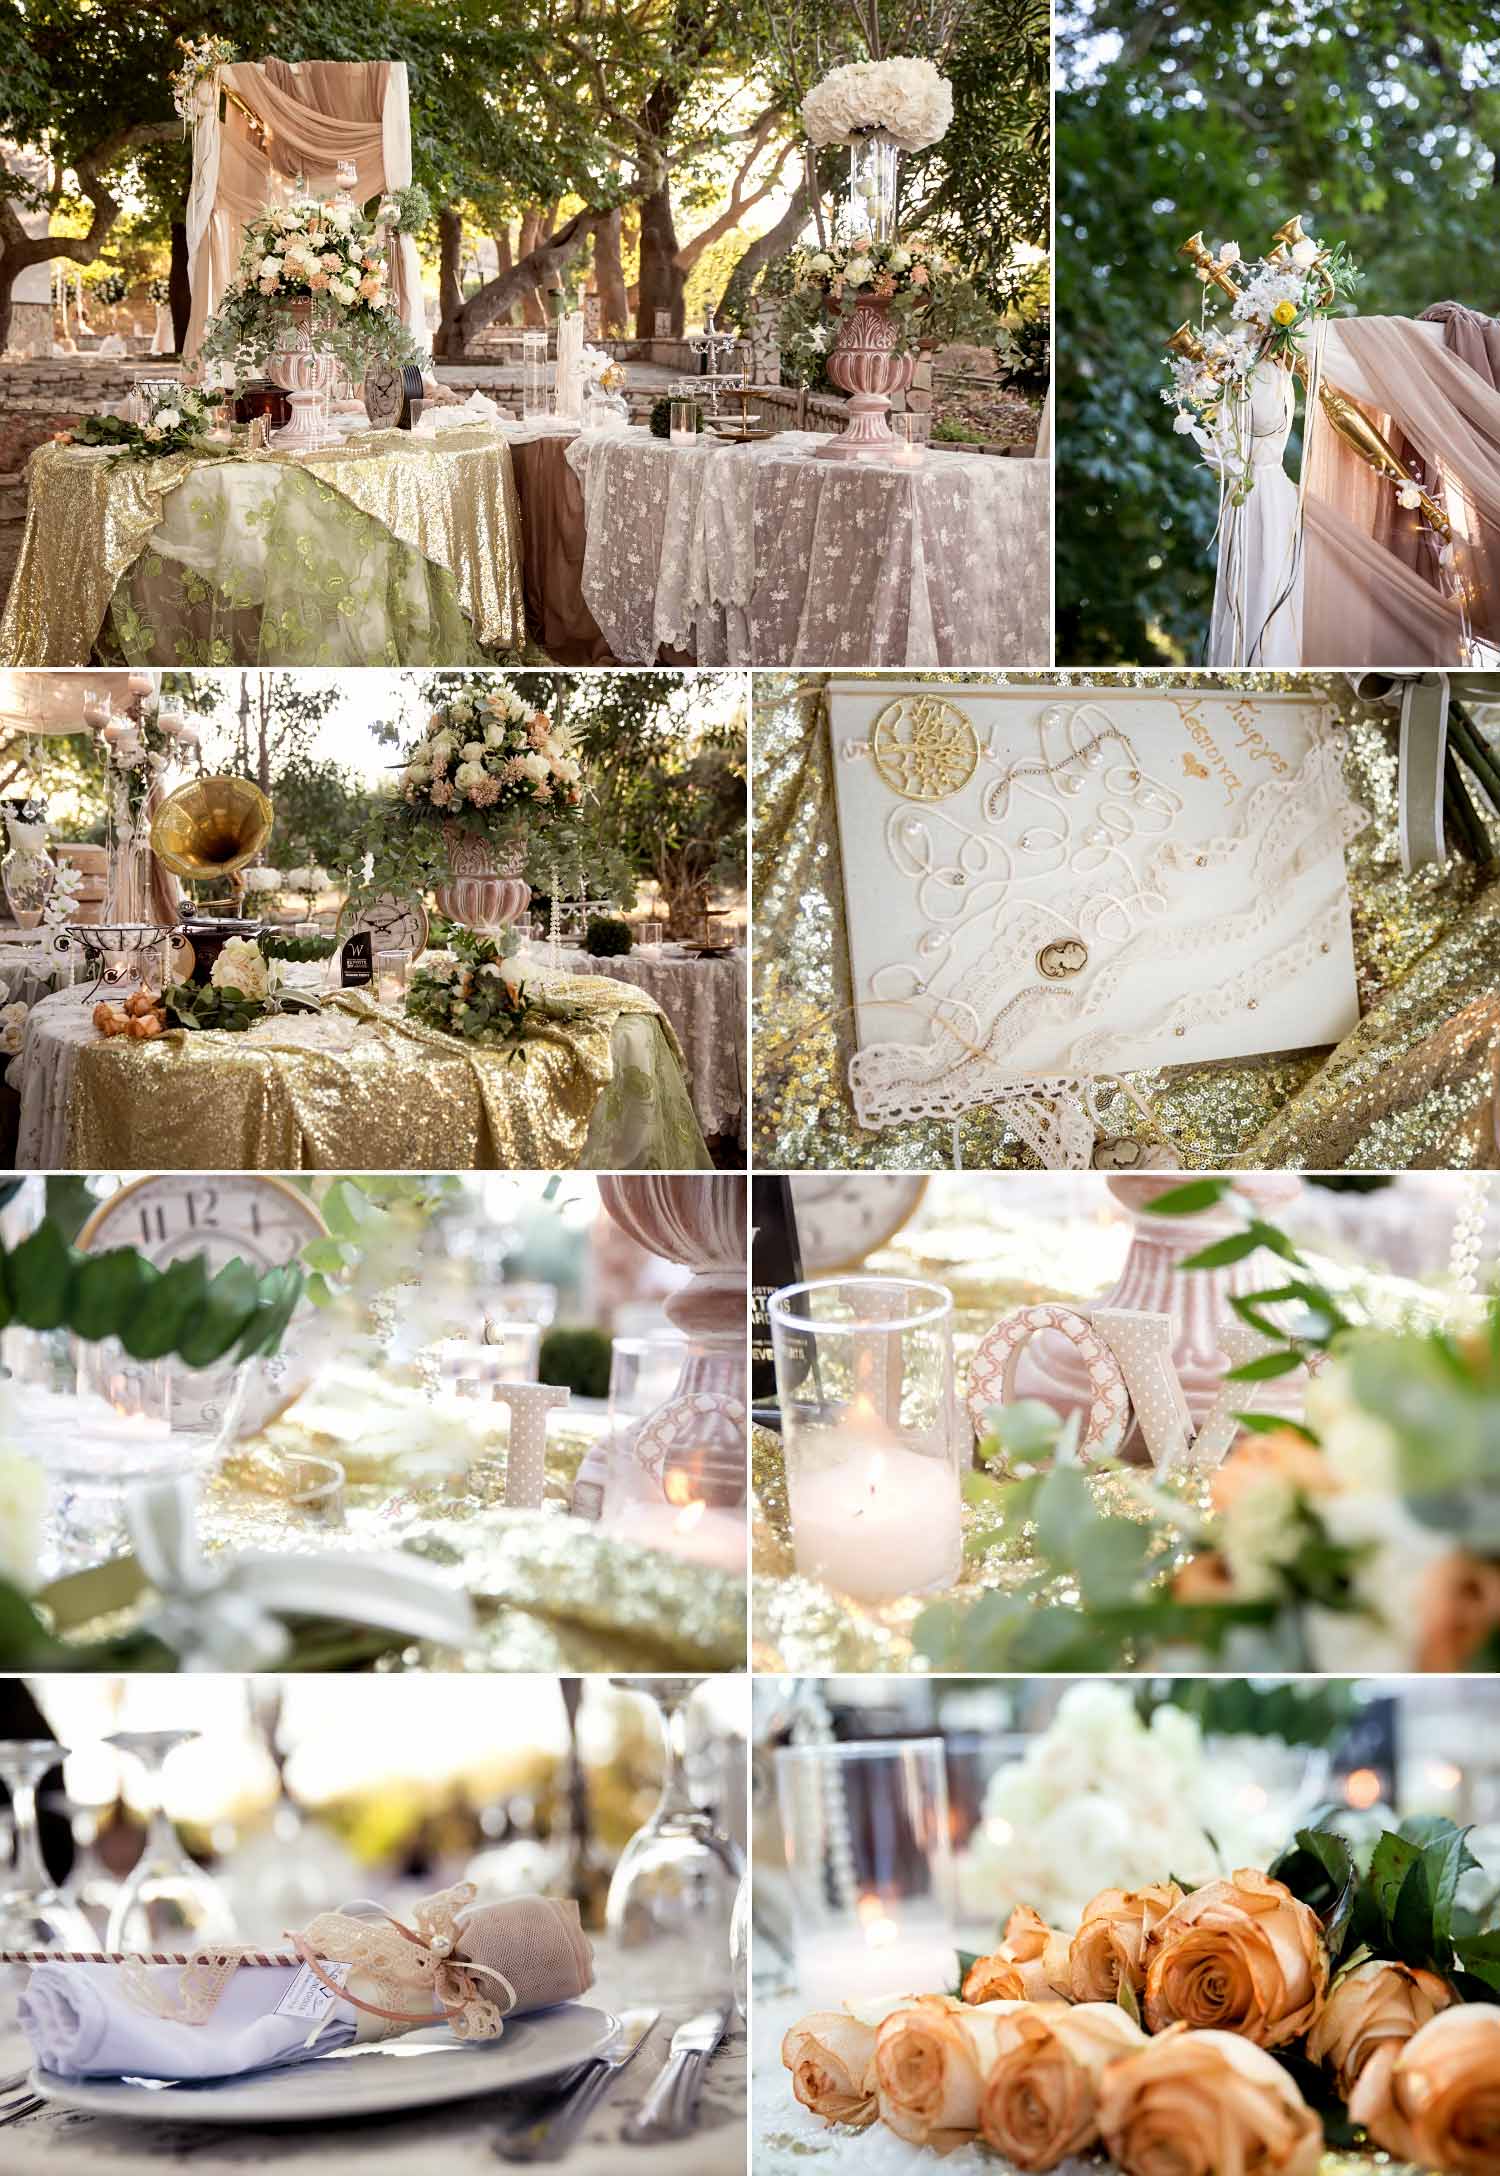 A-magical-wedding-in-a-forest-by-Diamond-Events-planning-company-05